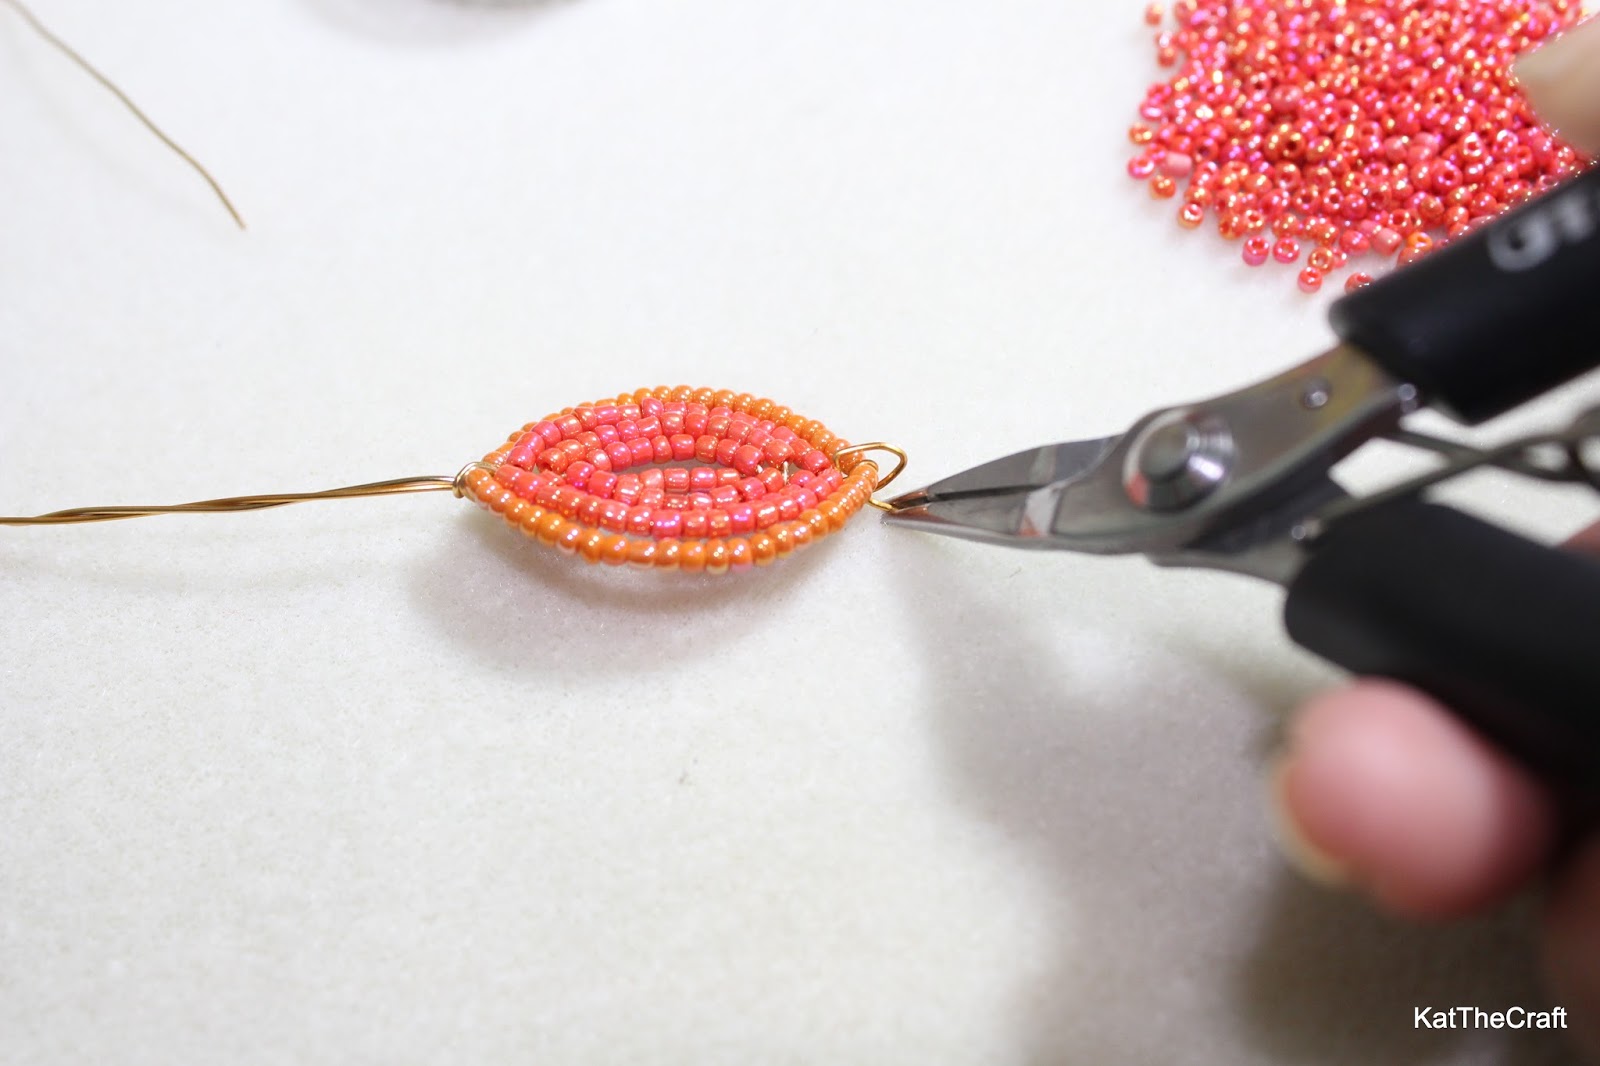 So Many Things to Do, So Little Time: How To Make Beaded Flowers